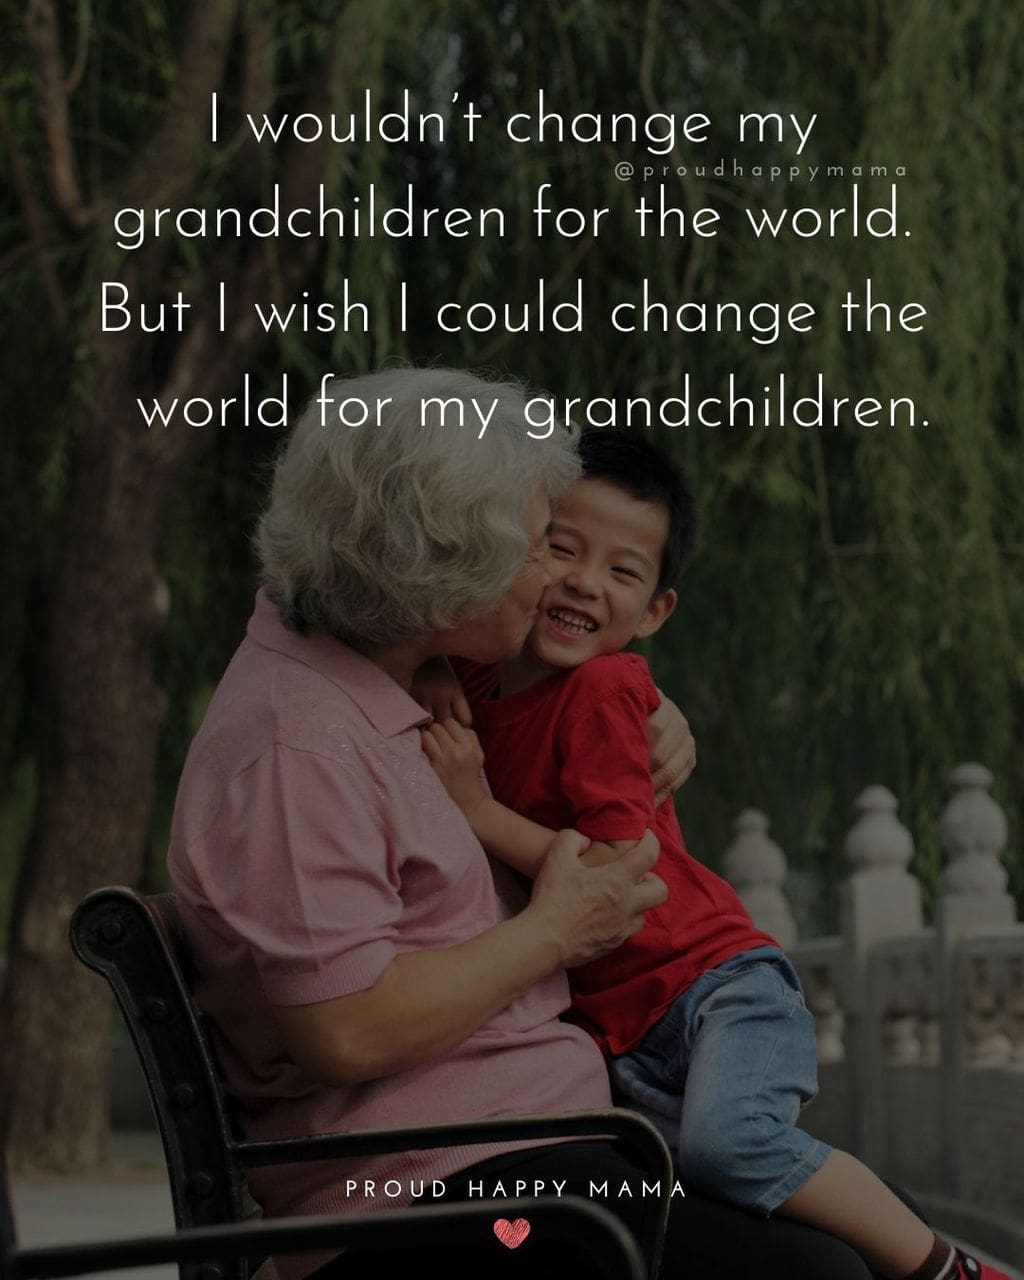 Quotes for Grandchildren - I wouldnt change my grandchildren for the world. But I wish I could change the world for my grandchildren.